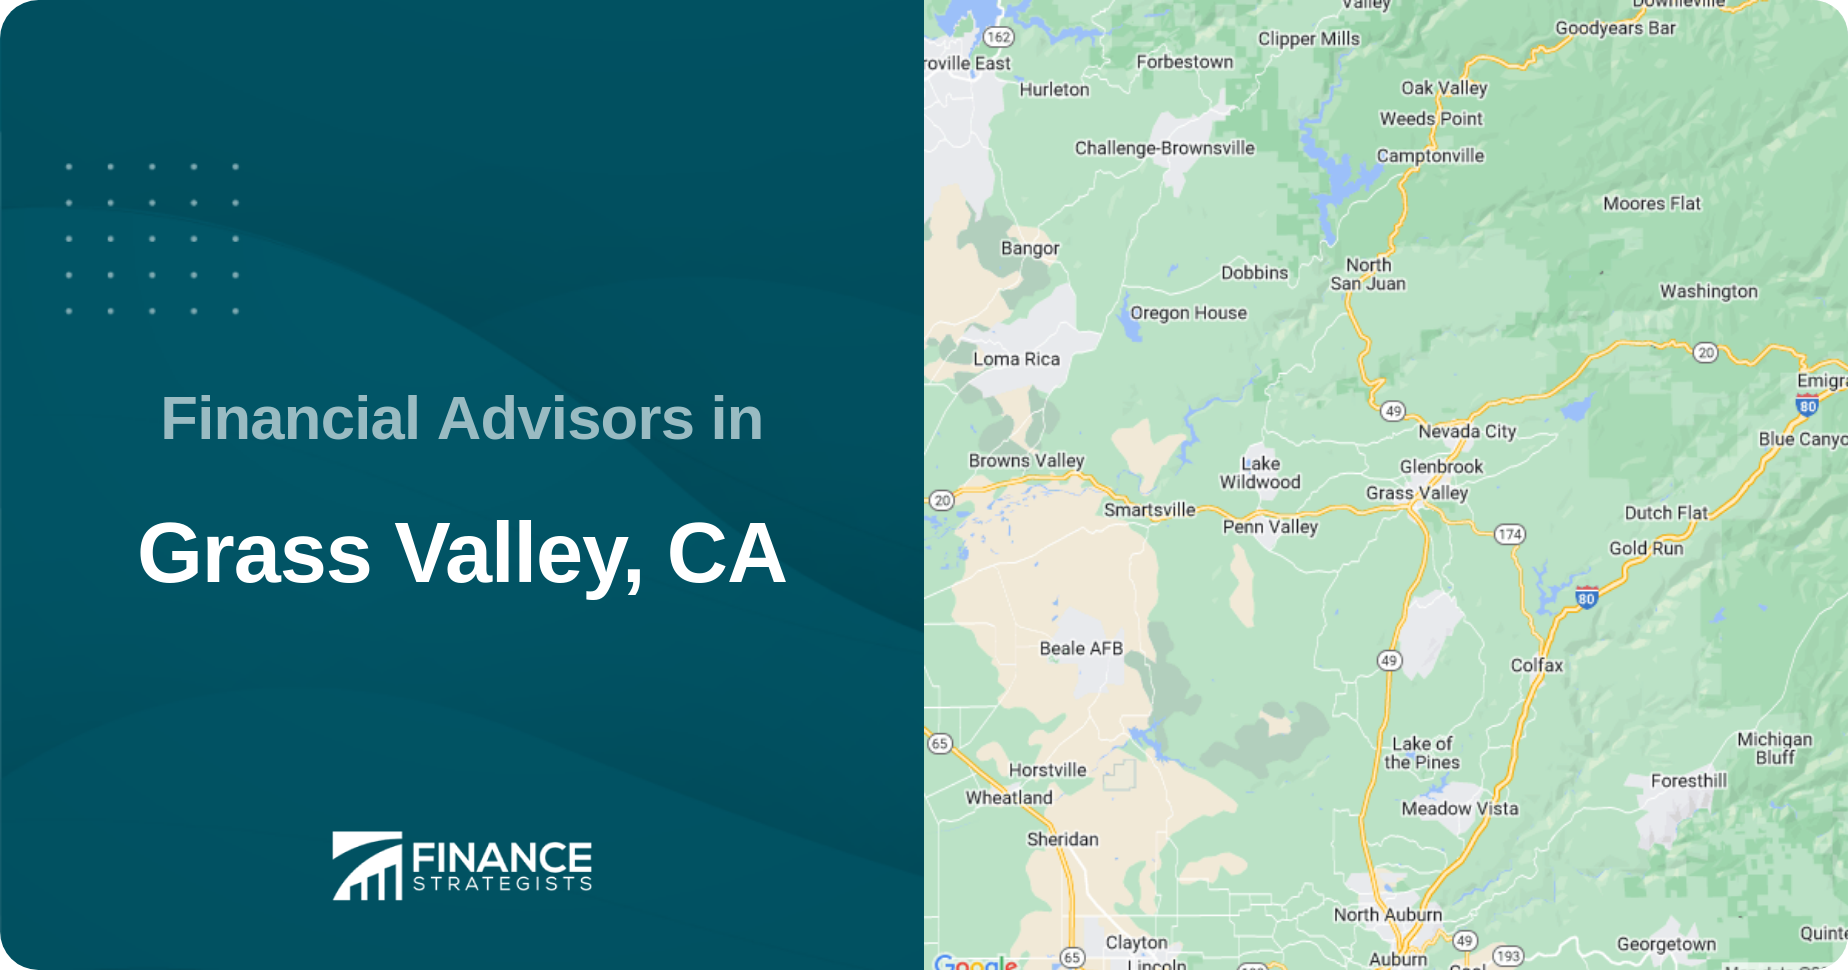 Financial Advisors in Grass Valley, CA